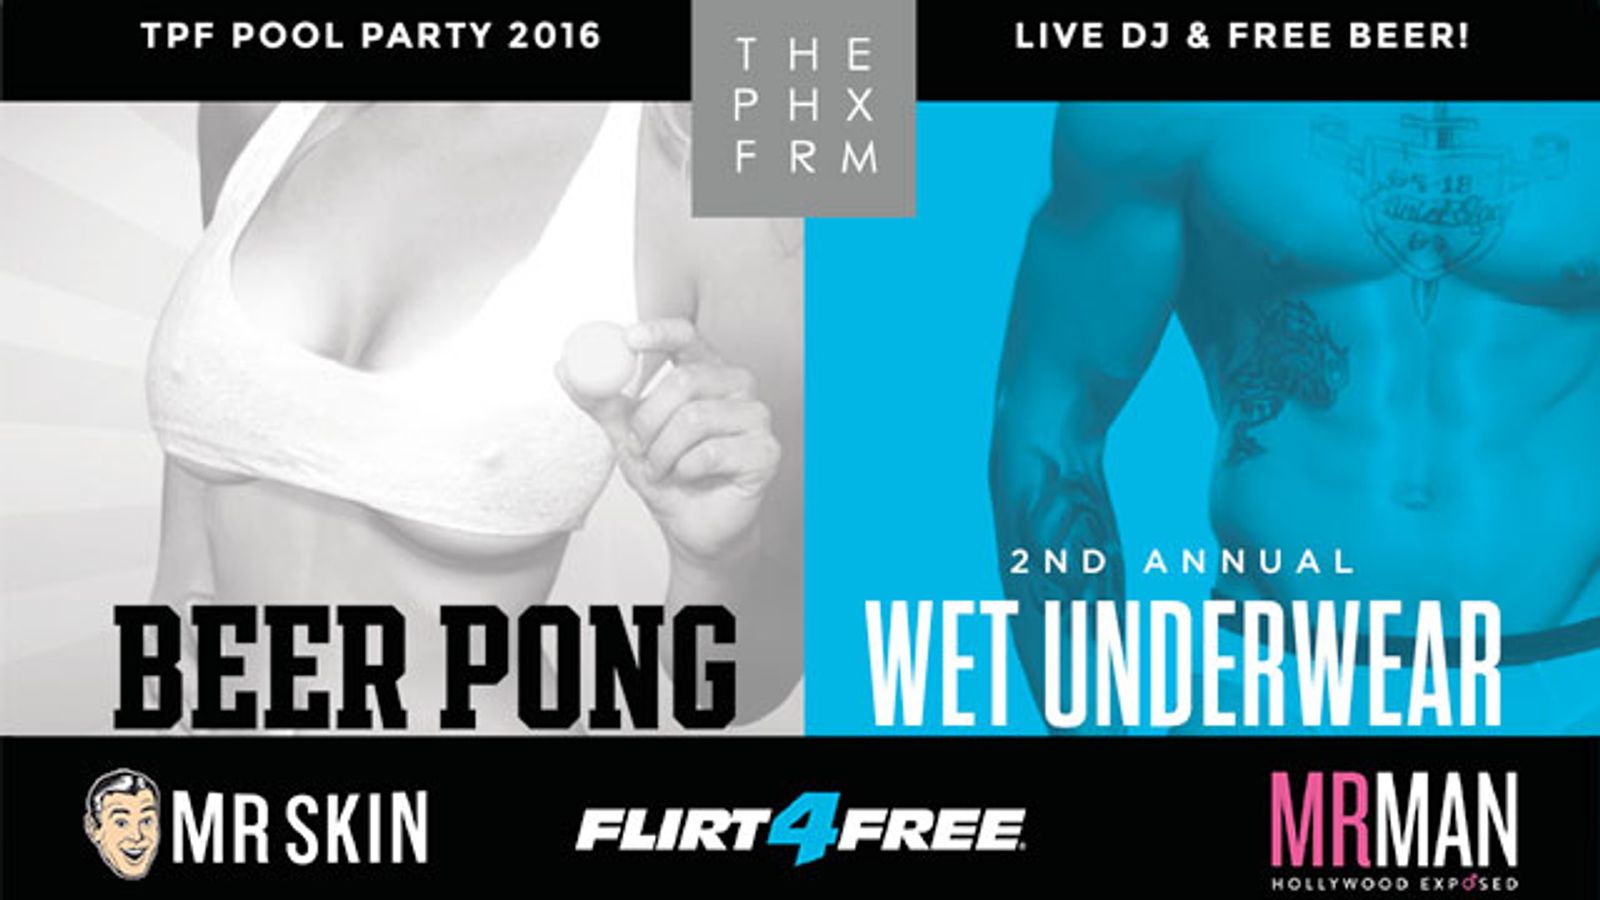 The Phoenix Forum Pool Party To Be Hosted By Mr. Skin/Mr. Man, Flirt4Free